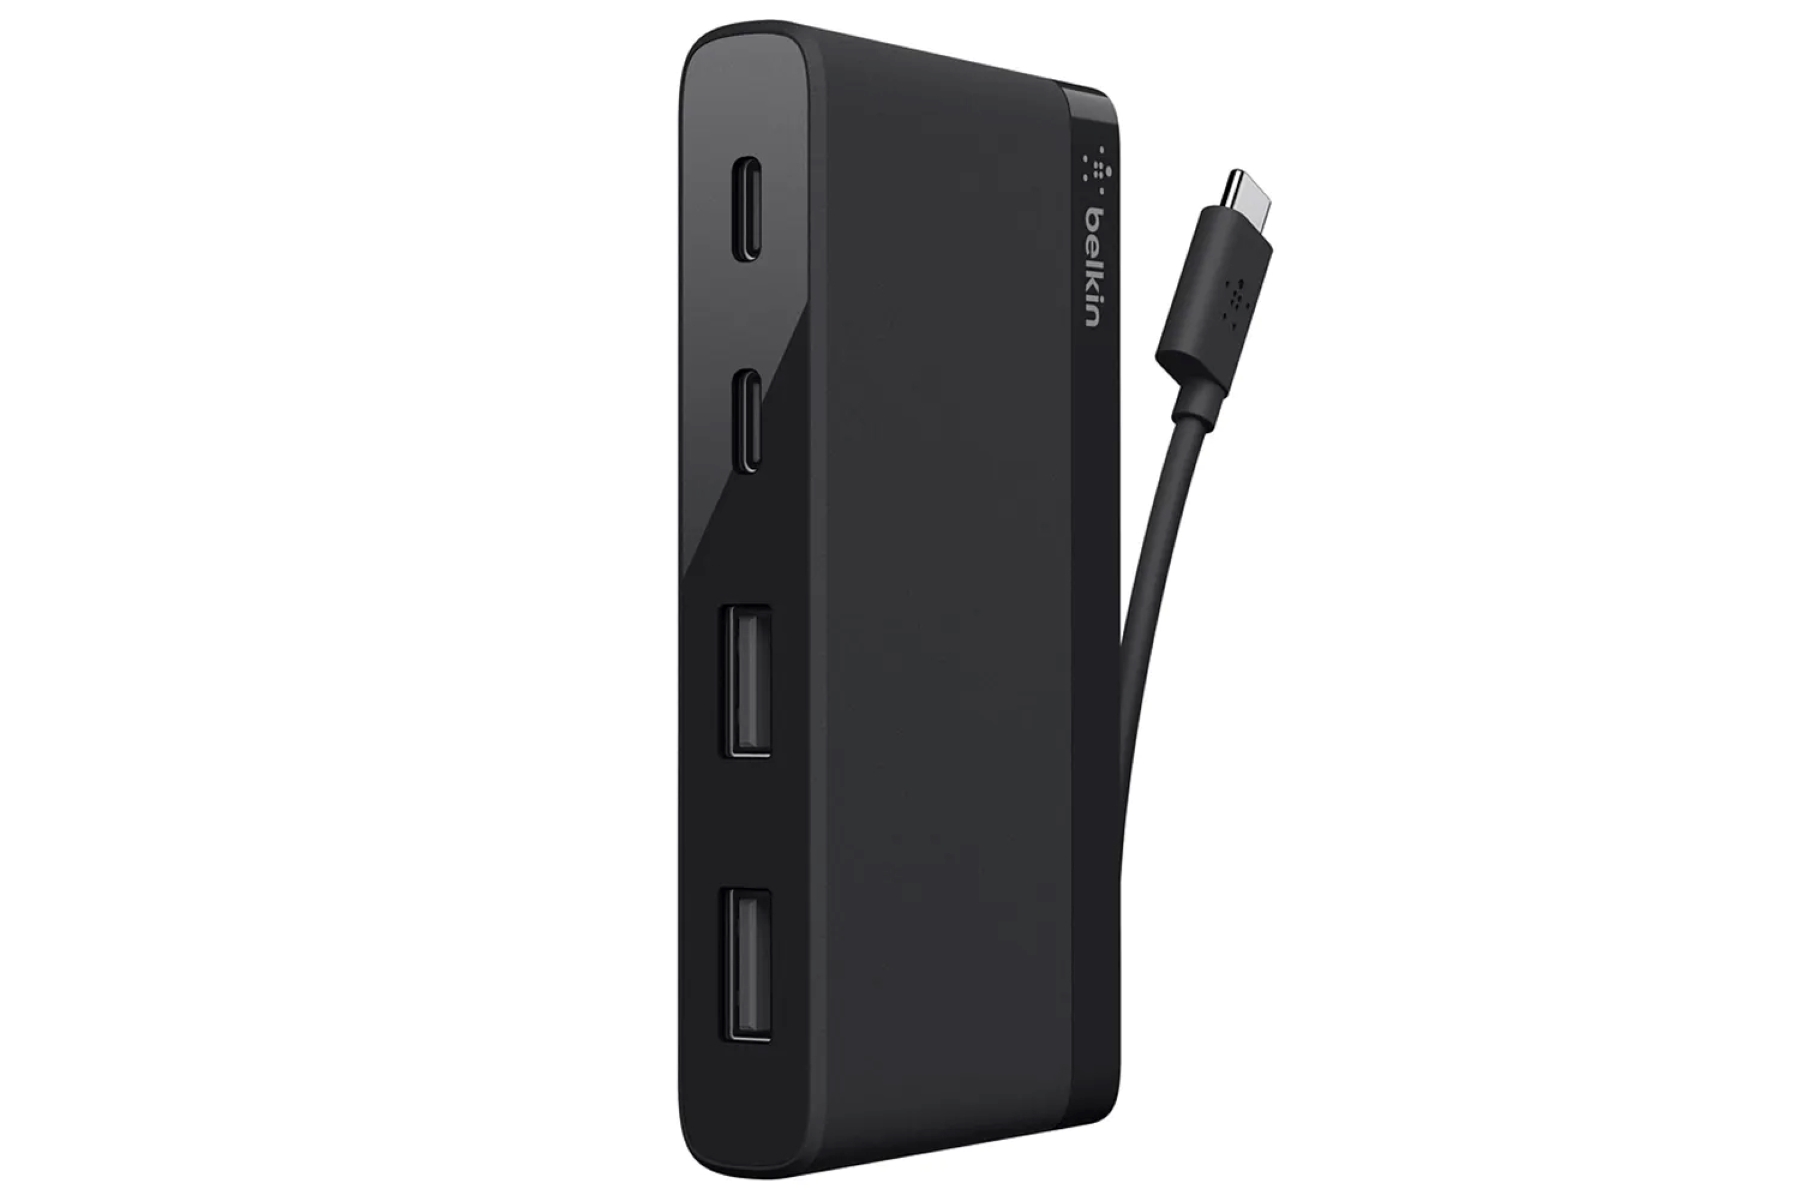 Why Do USB Devices Fail When Connected To Belkin USB Hub